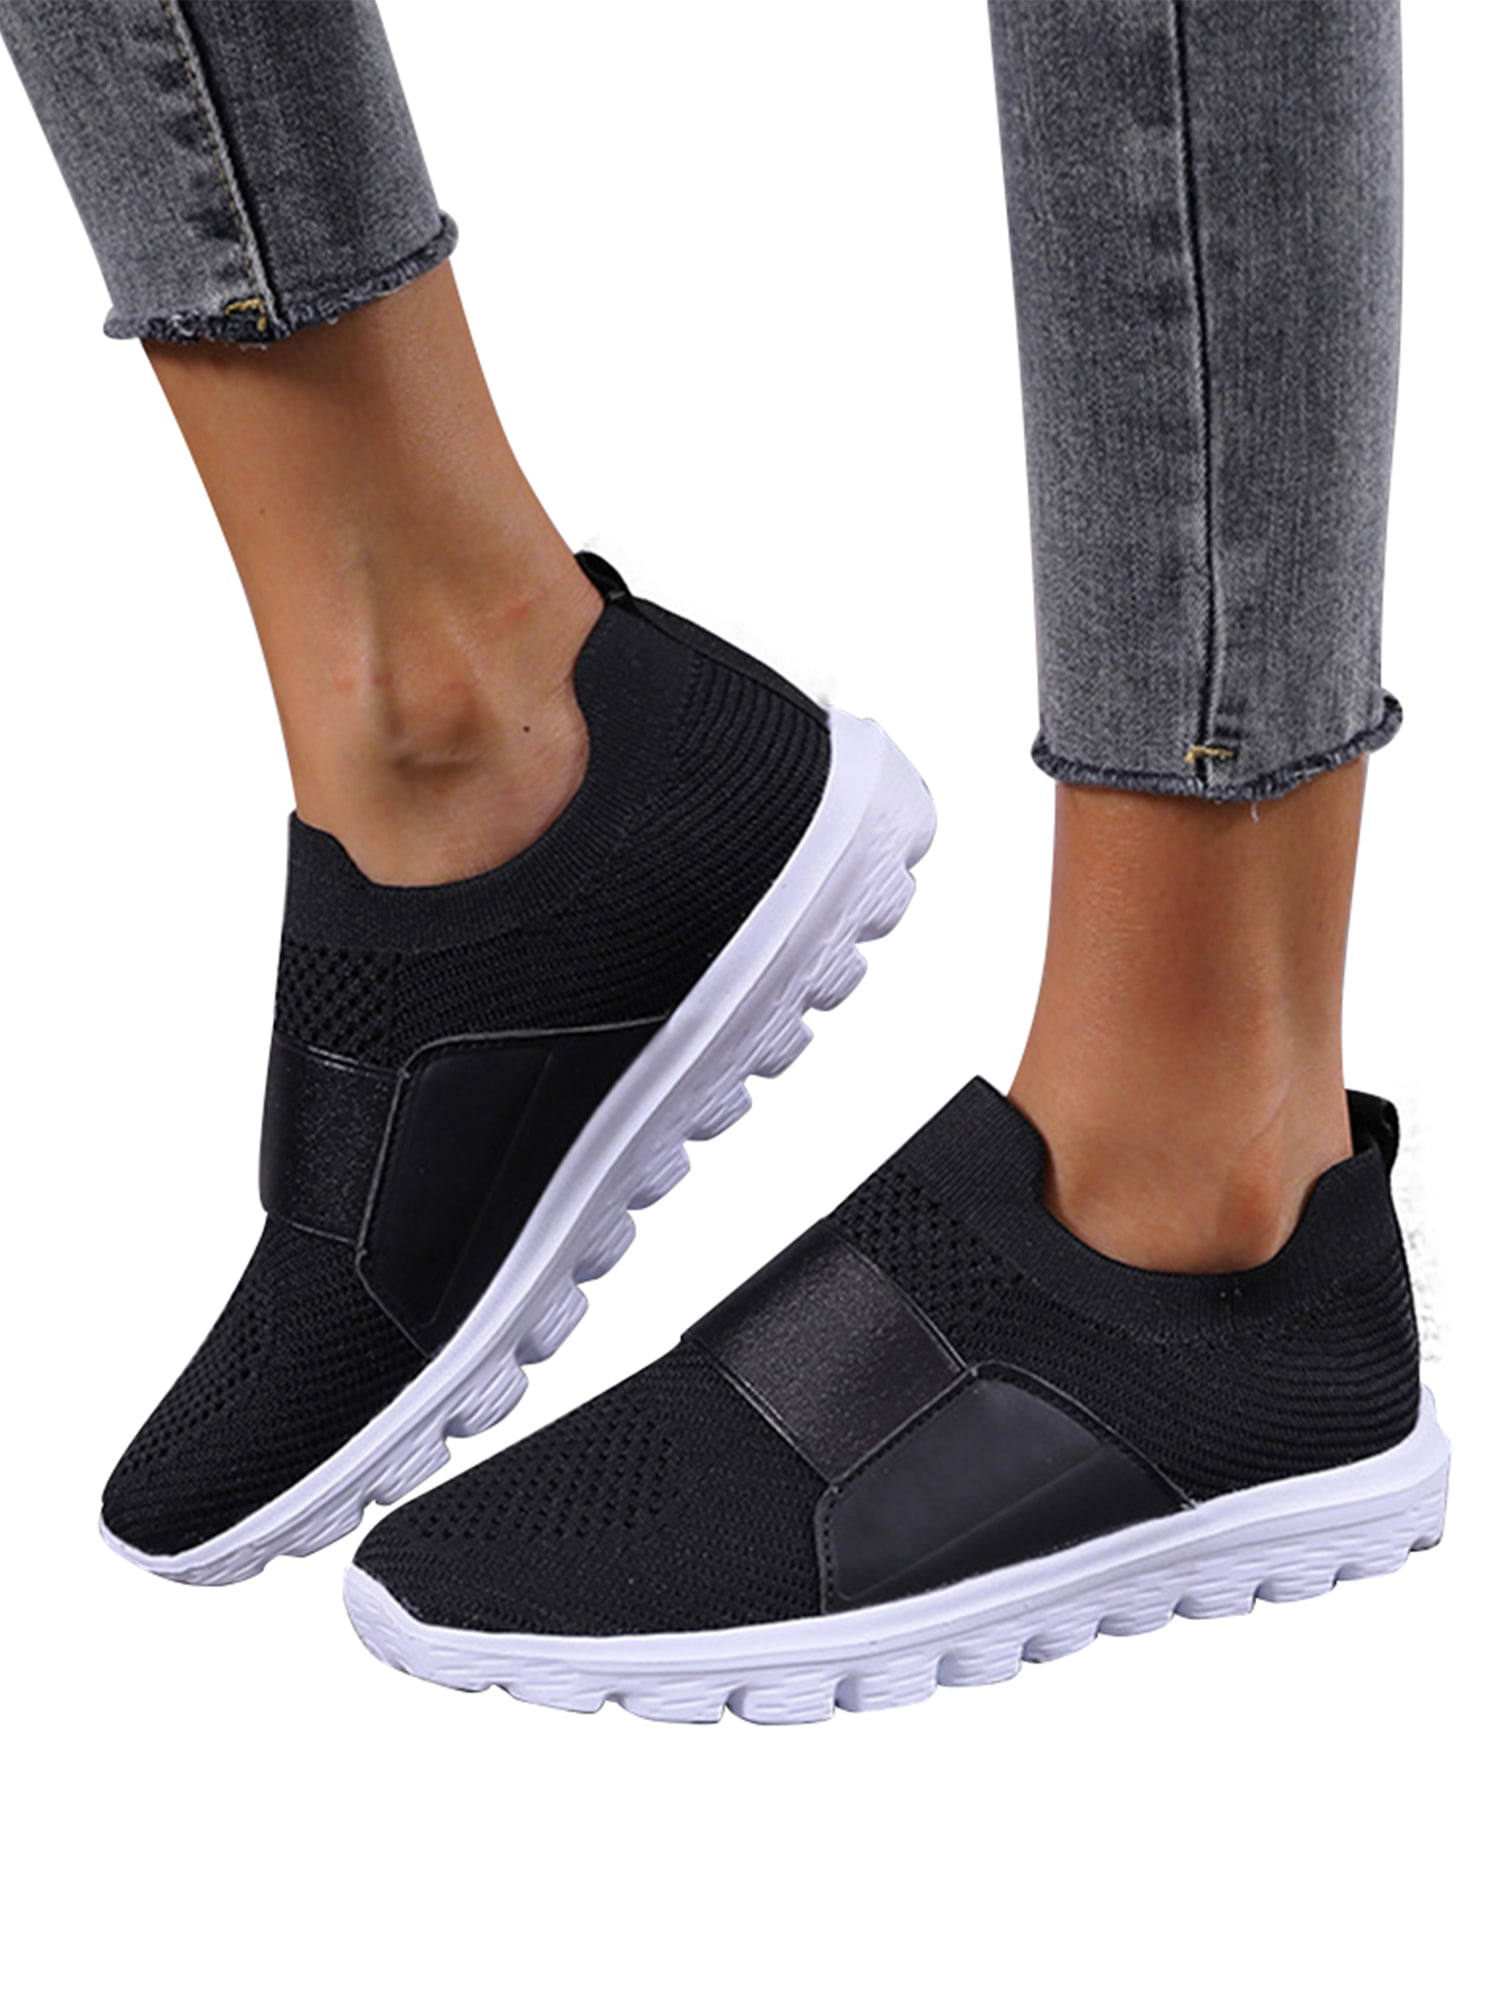 Ladies Casual Pumps Running Trainers Womens Sneakers Slip On Sport Jogging Shoes